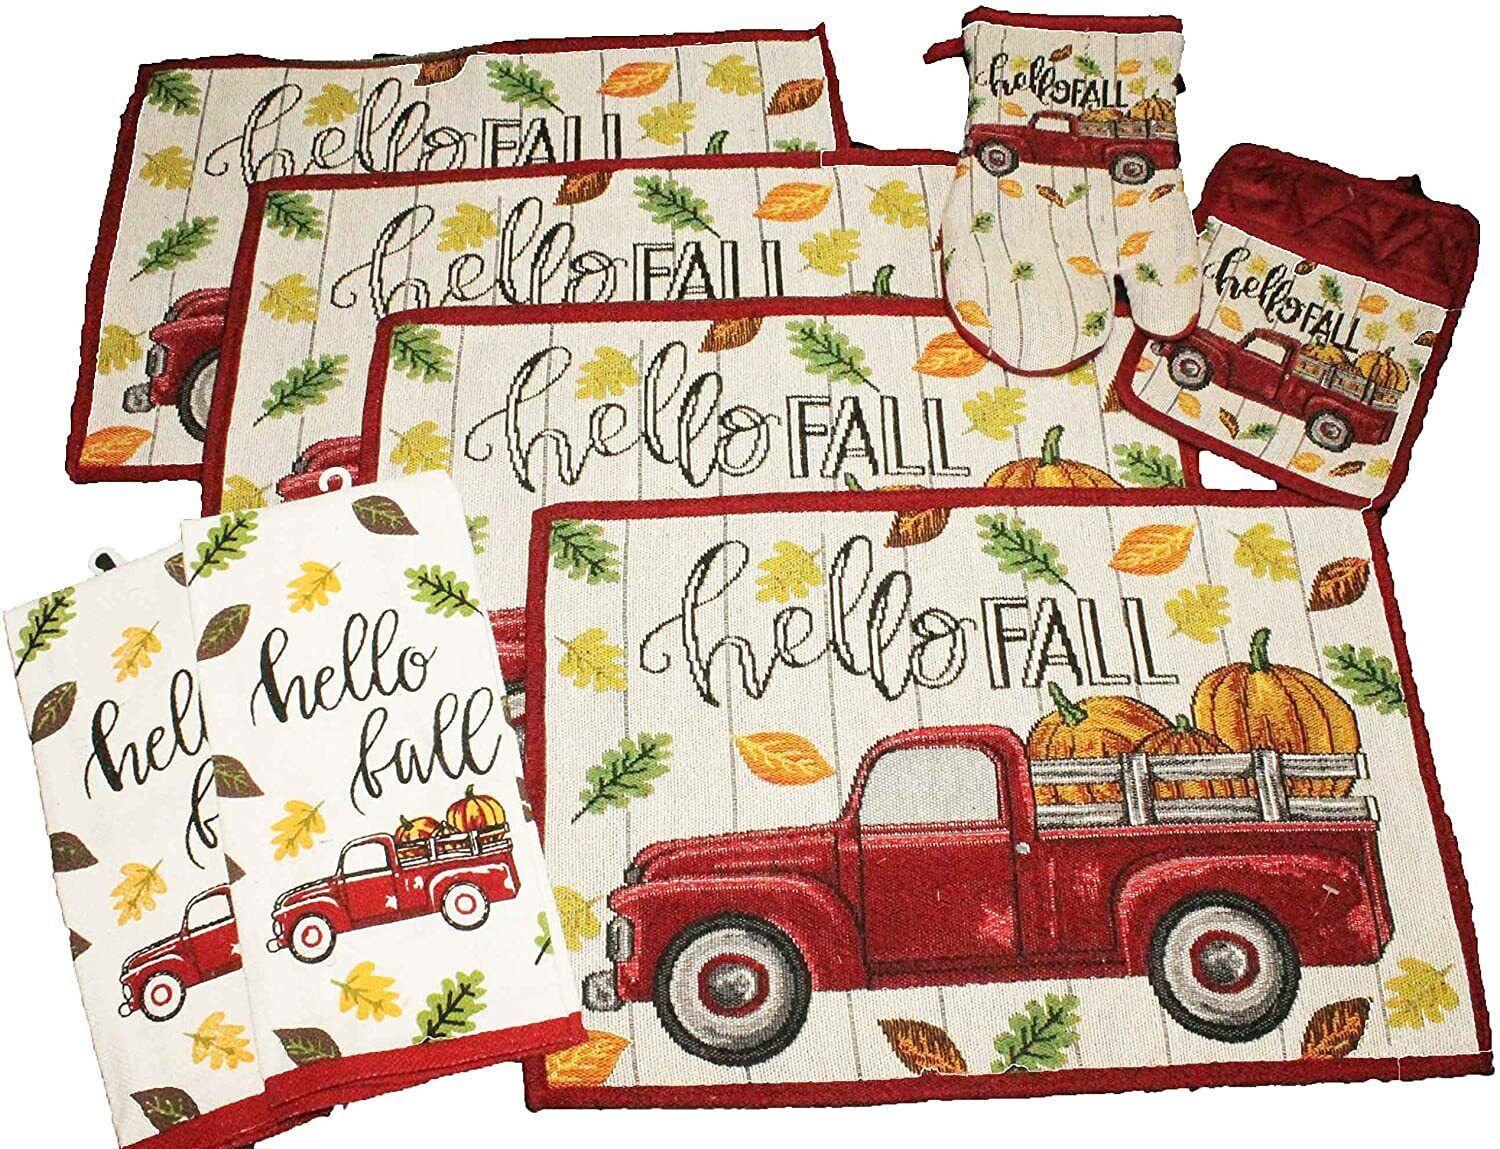 8 pc Vintage Truck Fall Kitchen Decor Set - Hello Fall - Matching Fall Placemats, Kitchen Towels, Pot Holder, and Oven Mitt - Comes in an Organza Bag so It's Ready for Giving!